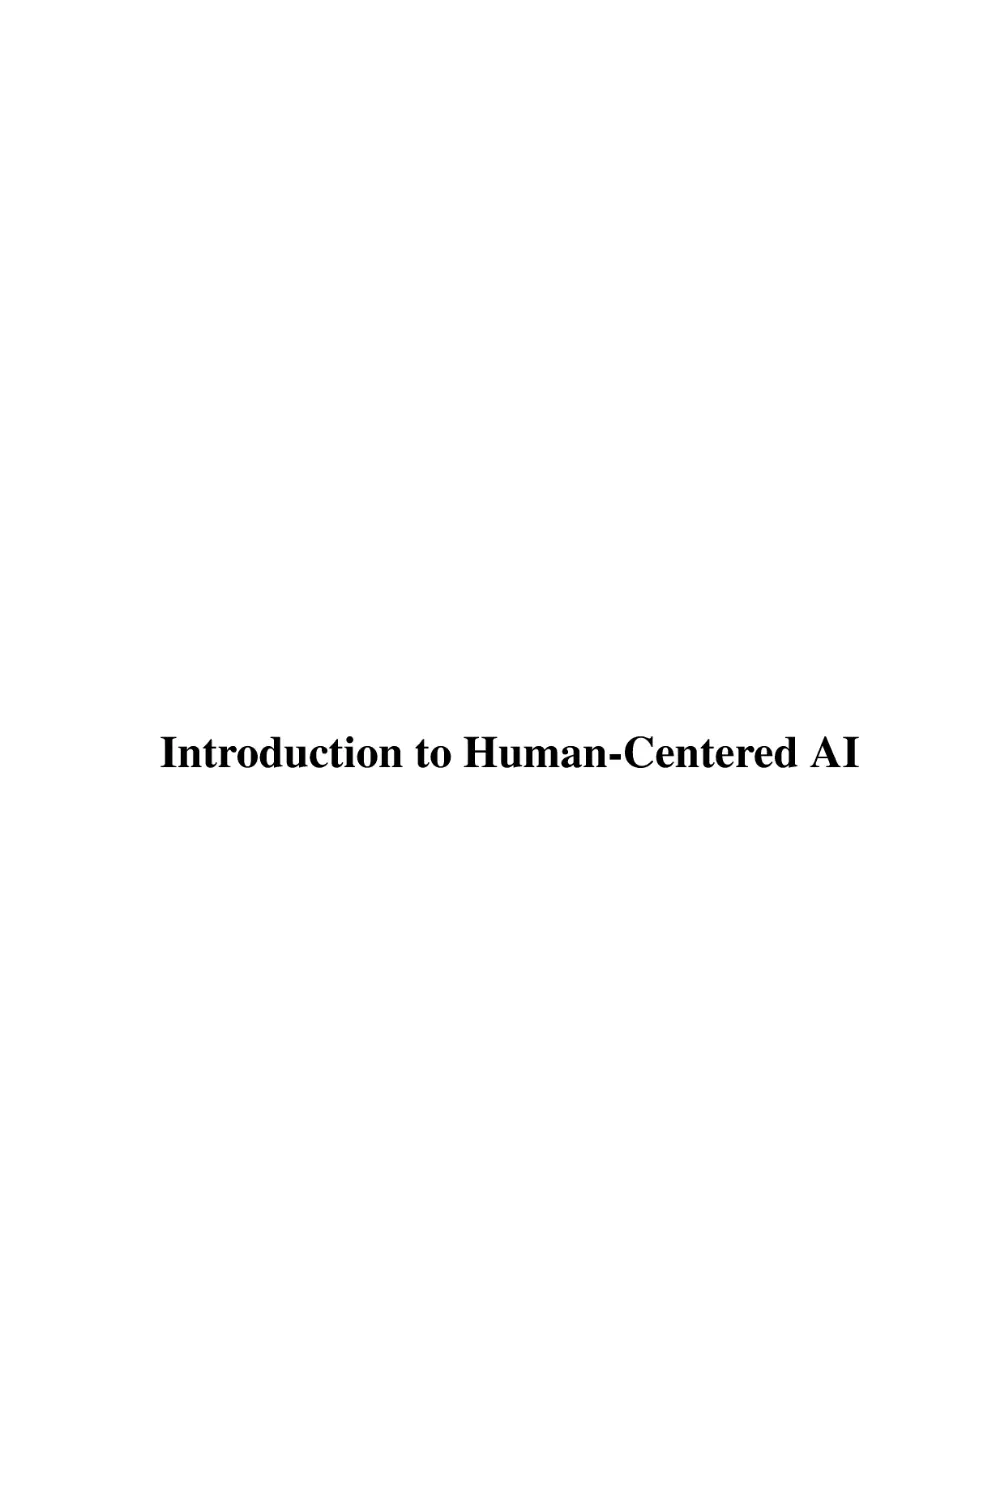 Introduction to Human-Centered AI